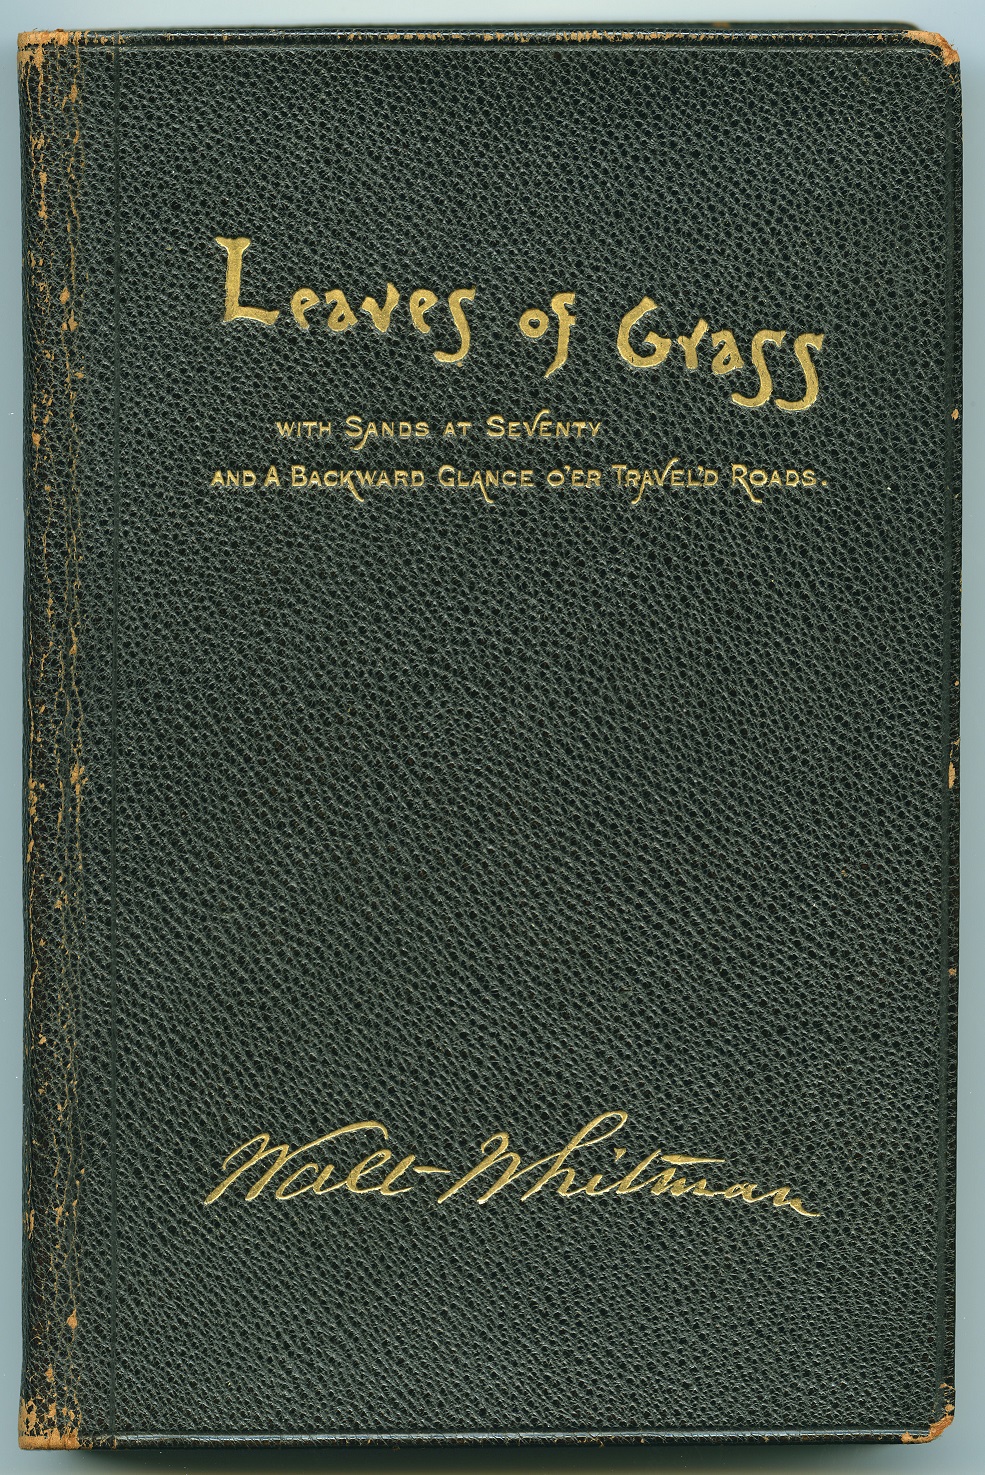 1889 title page